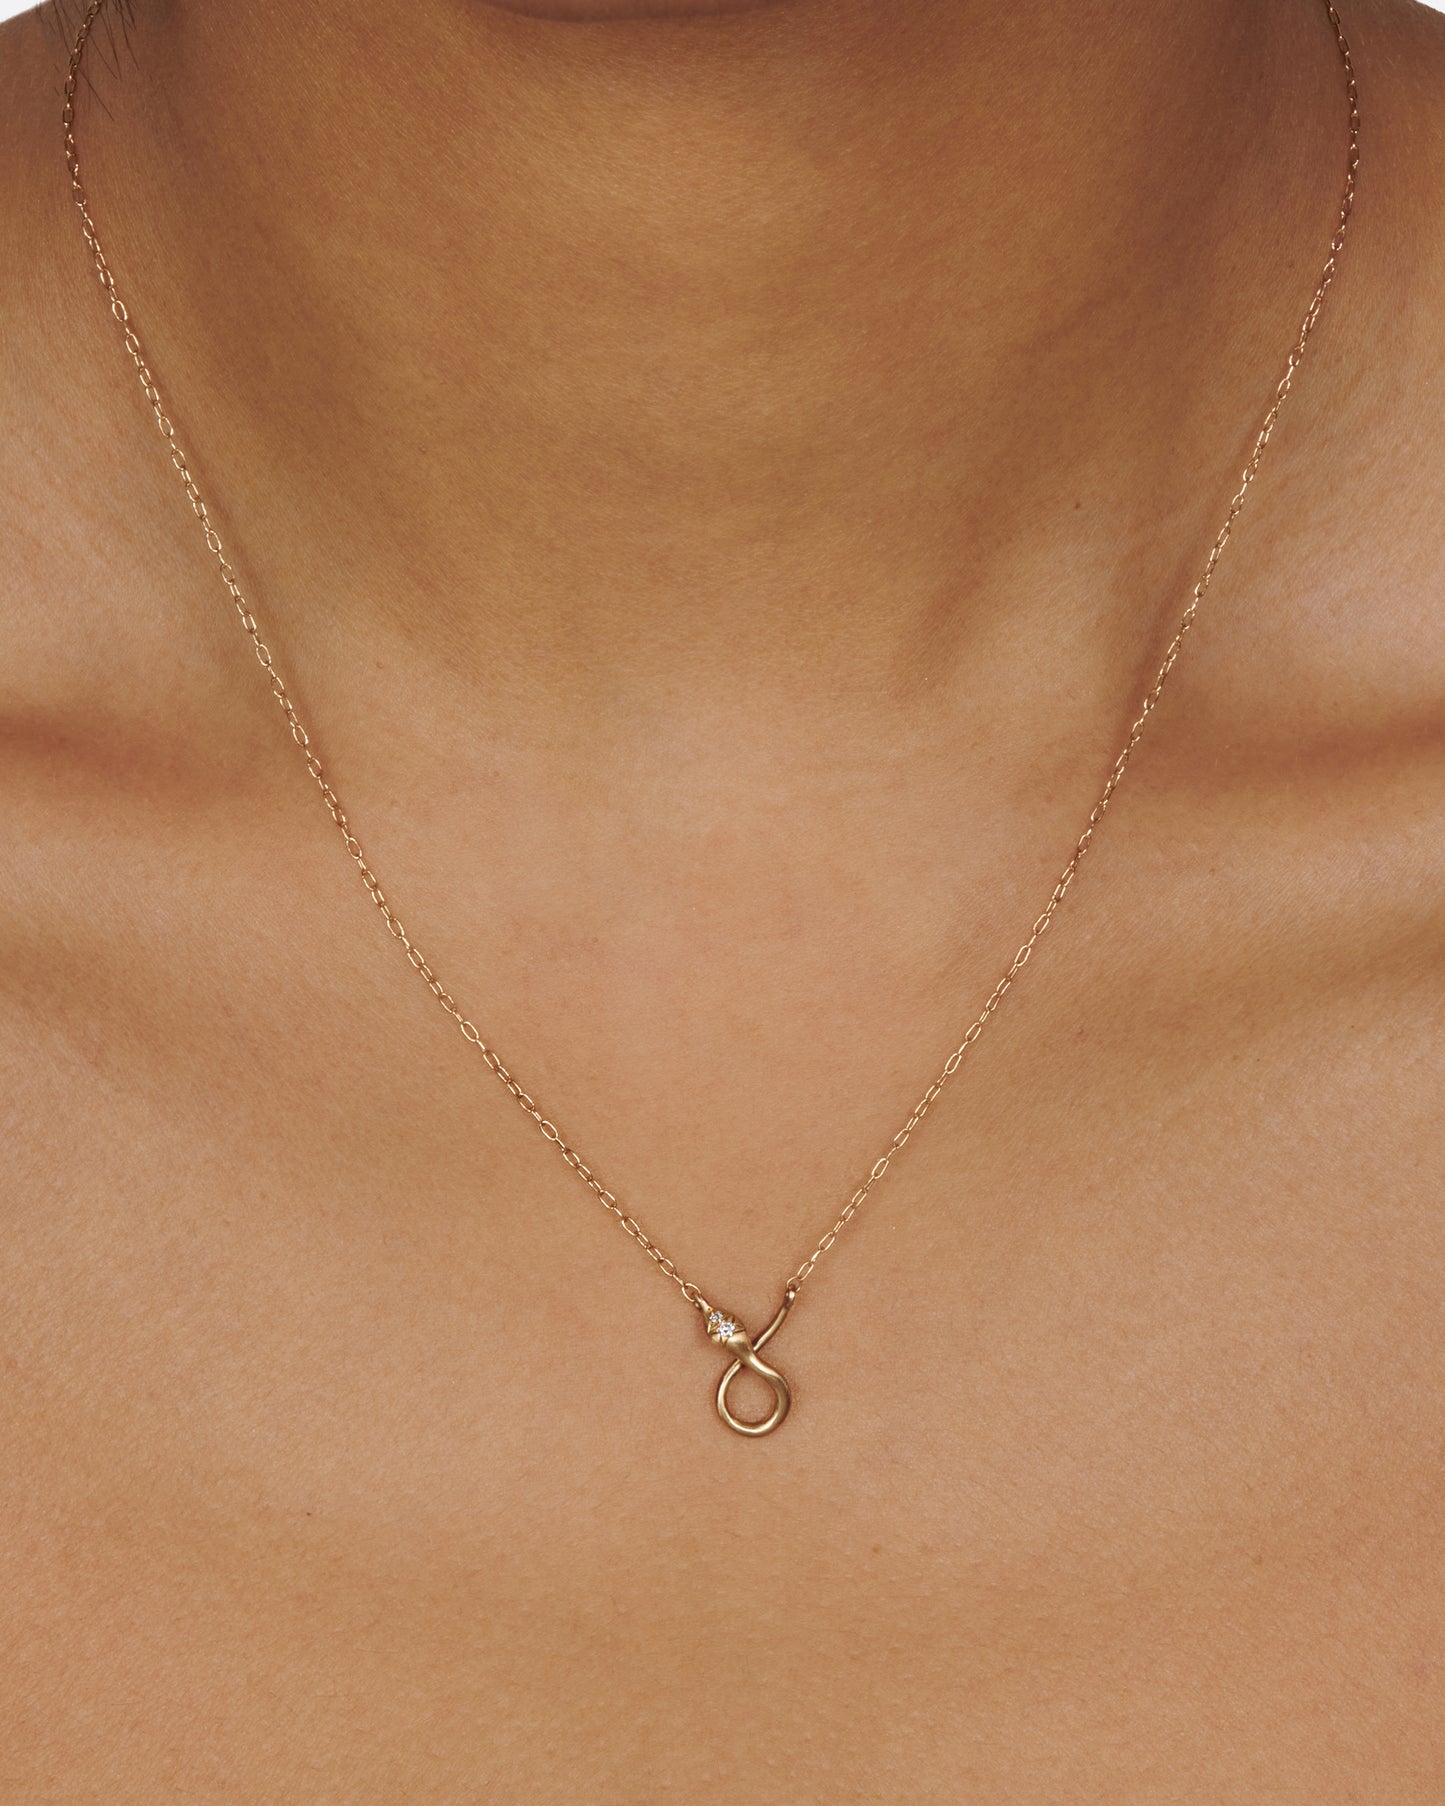 Wear this snake pendant necklace with your favorite charms